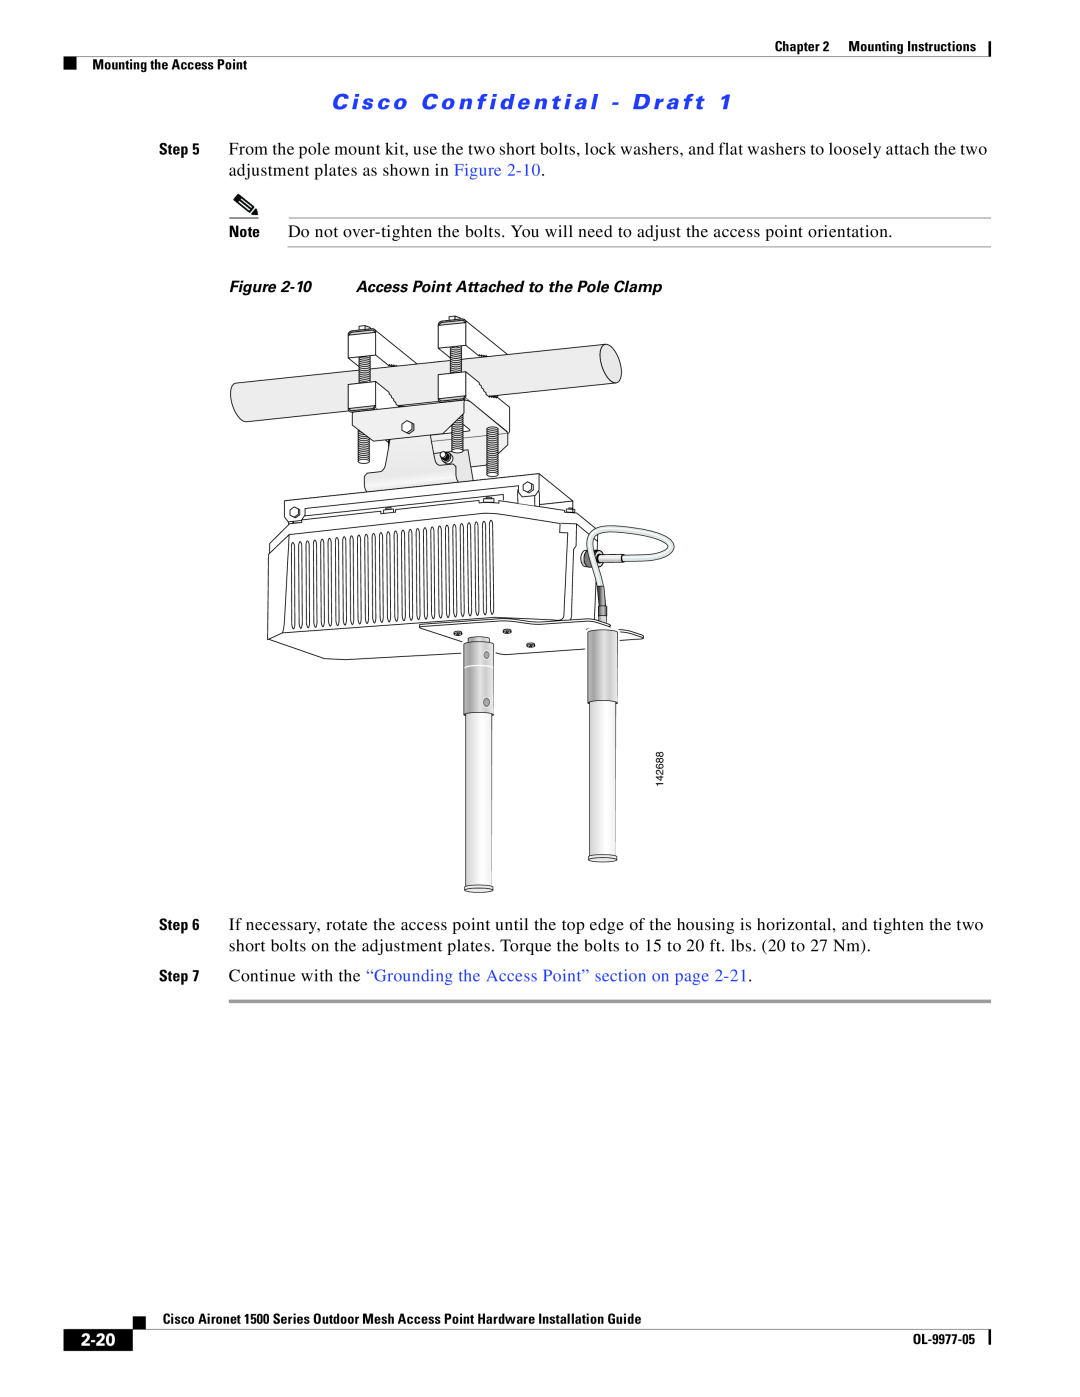 Cisco Systems 1500 Series 2-20, C i s c o C o n f i d e n t i a l - D r a ft, 10 Access Point Attached to the Pole Clamp 